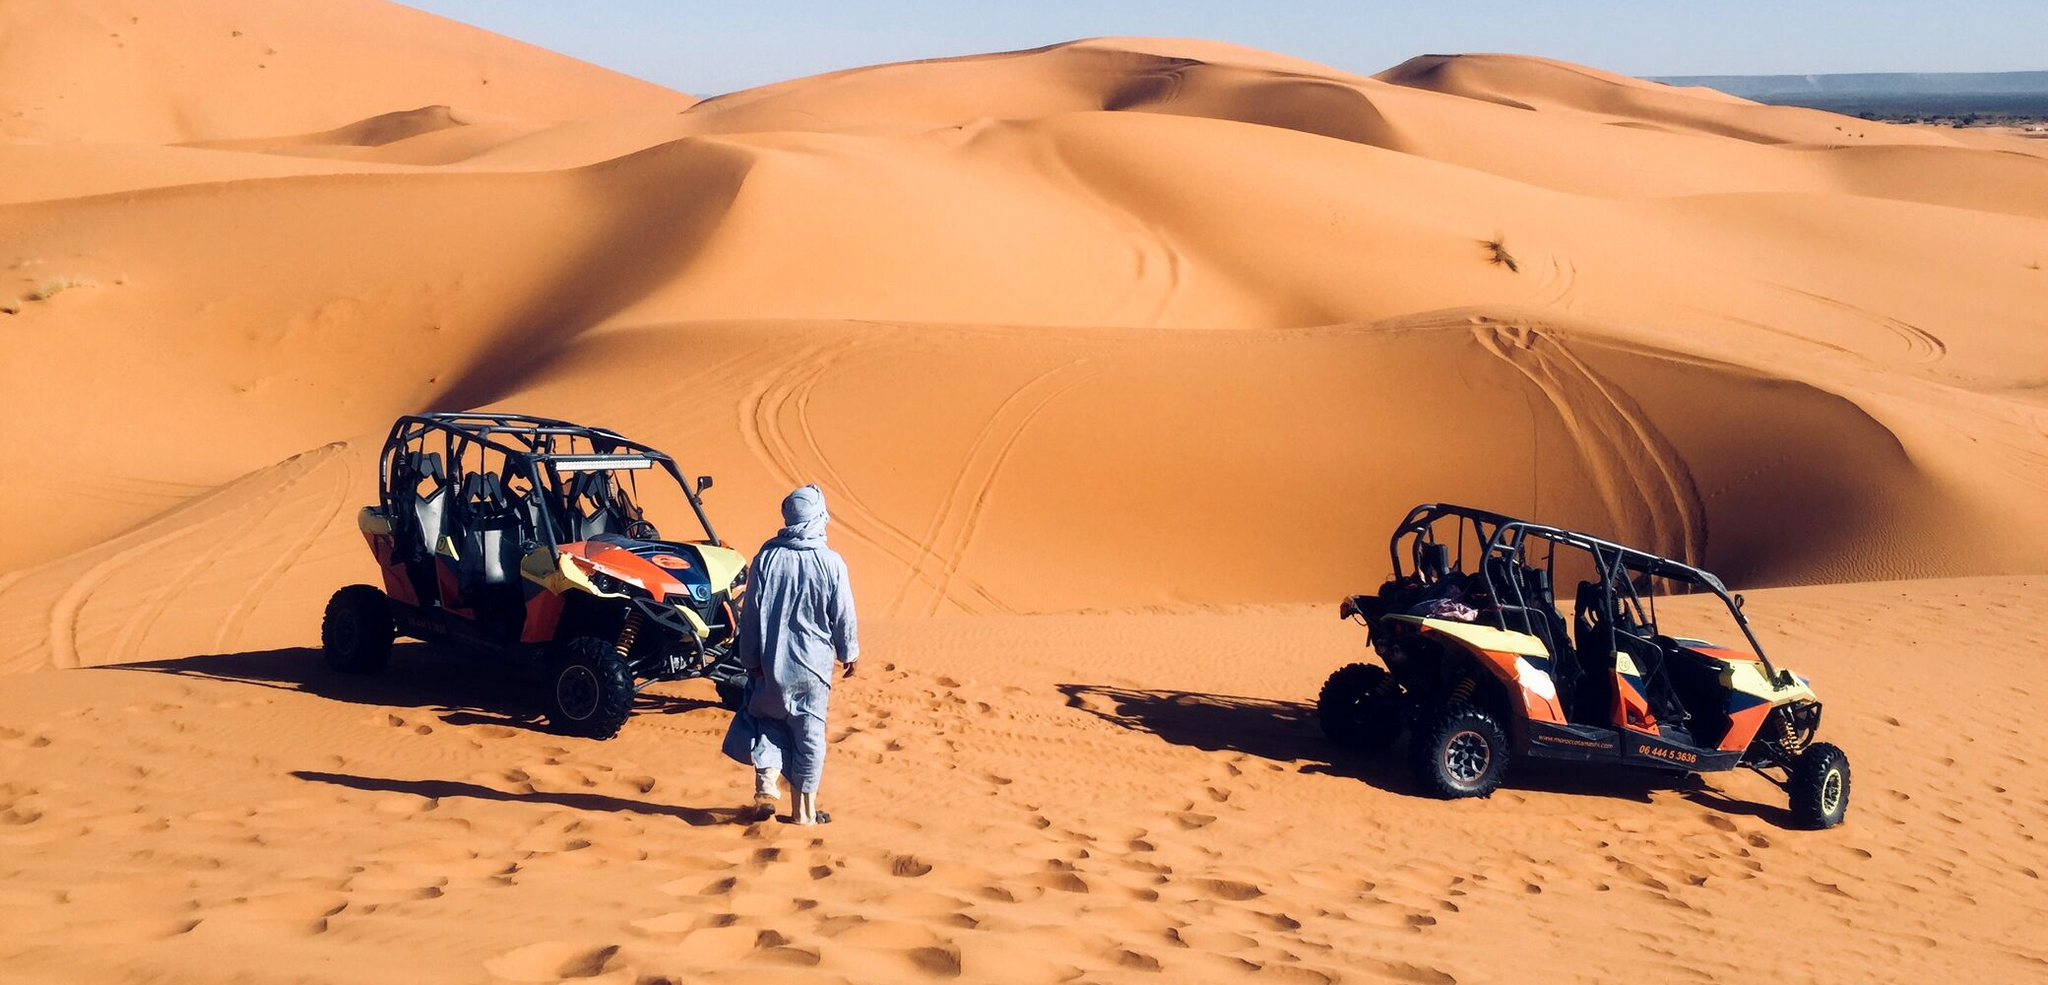 Lost Little One Travel Diaries. A guide to merzouga